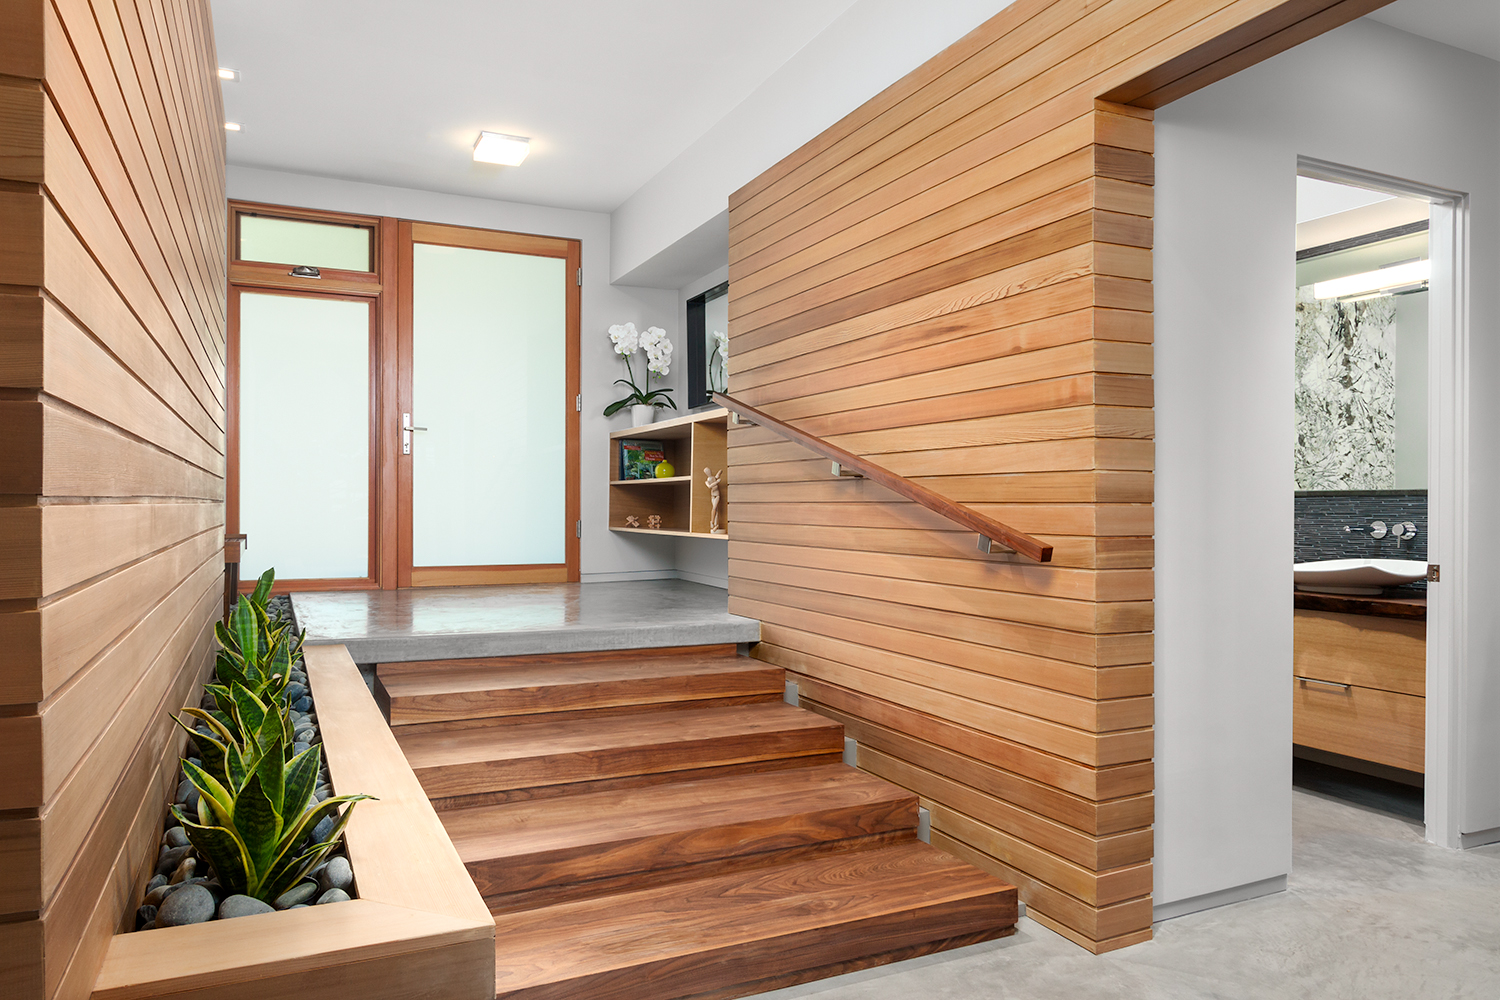 contemporary entrance with wooden stairs and some plats on the wall